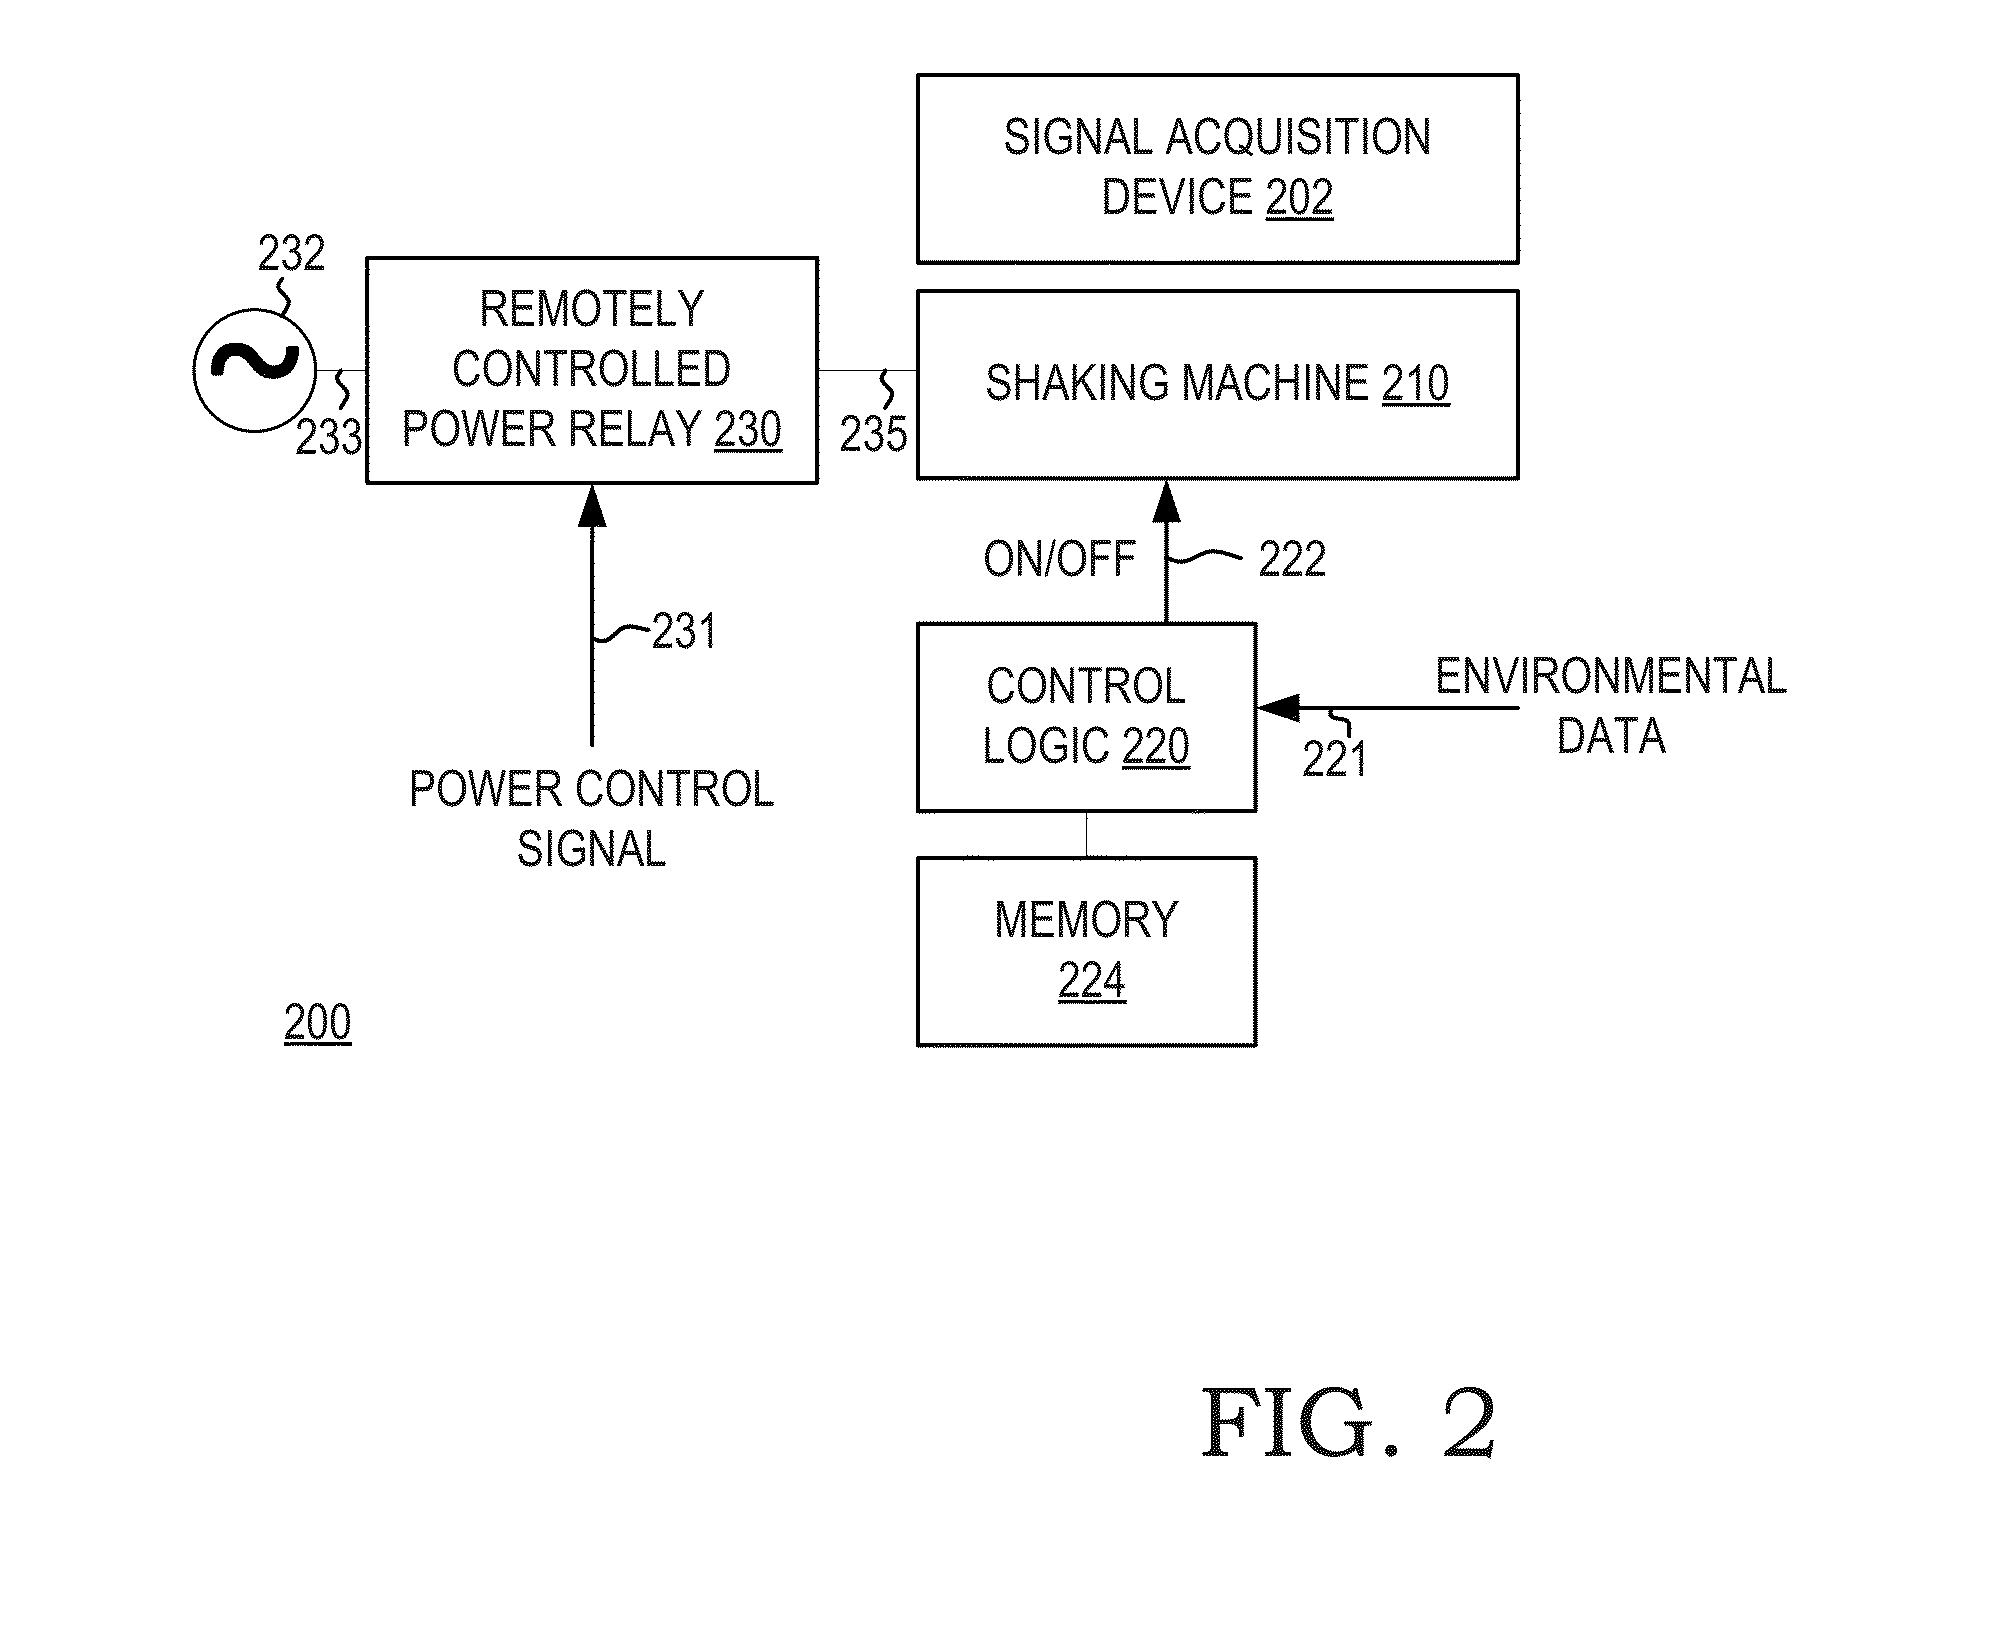 Remote control of shaking machine for a signal acquisition device